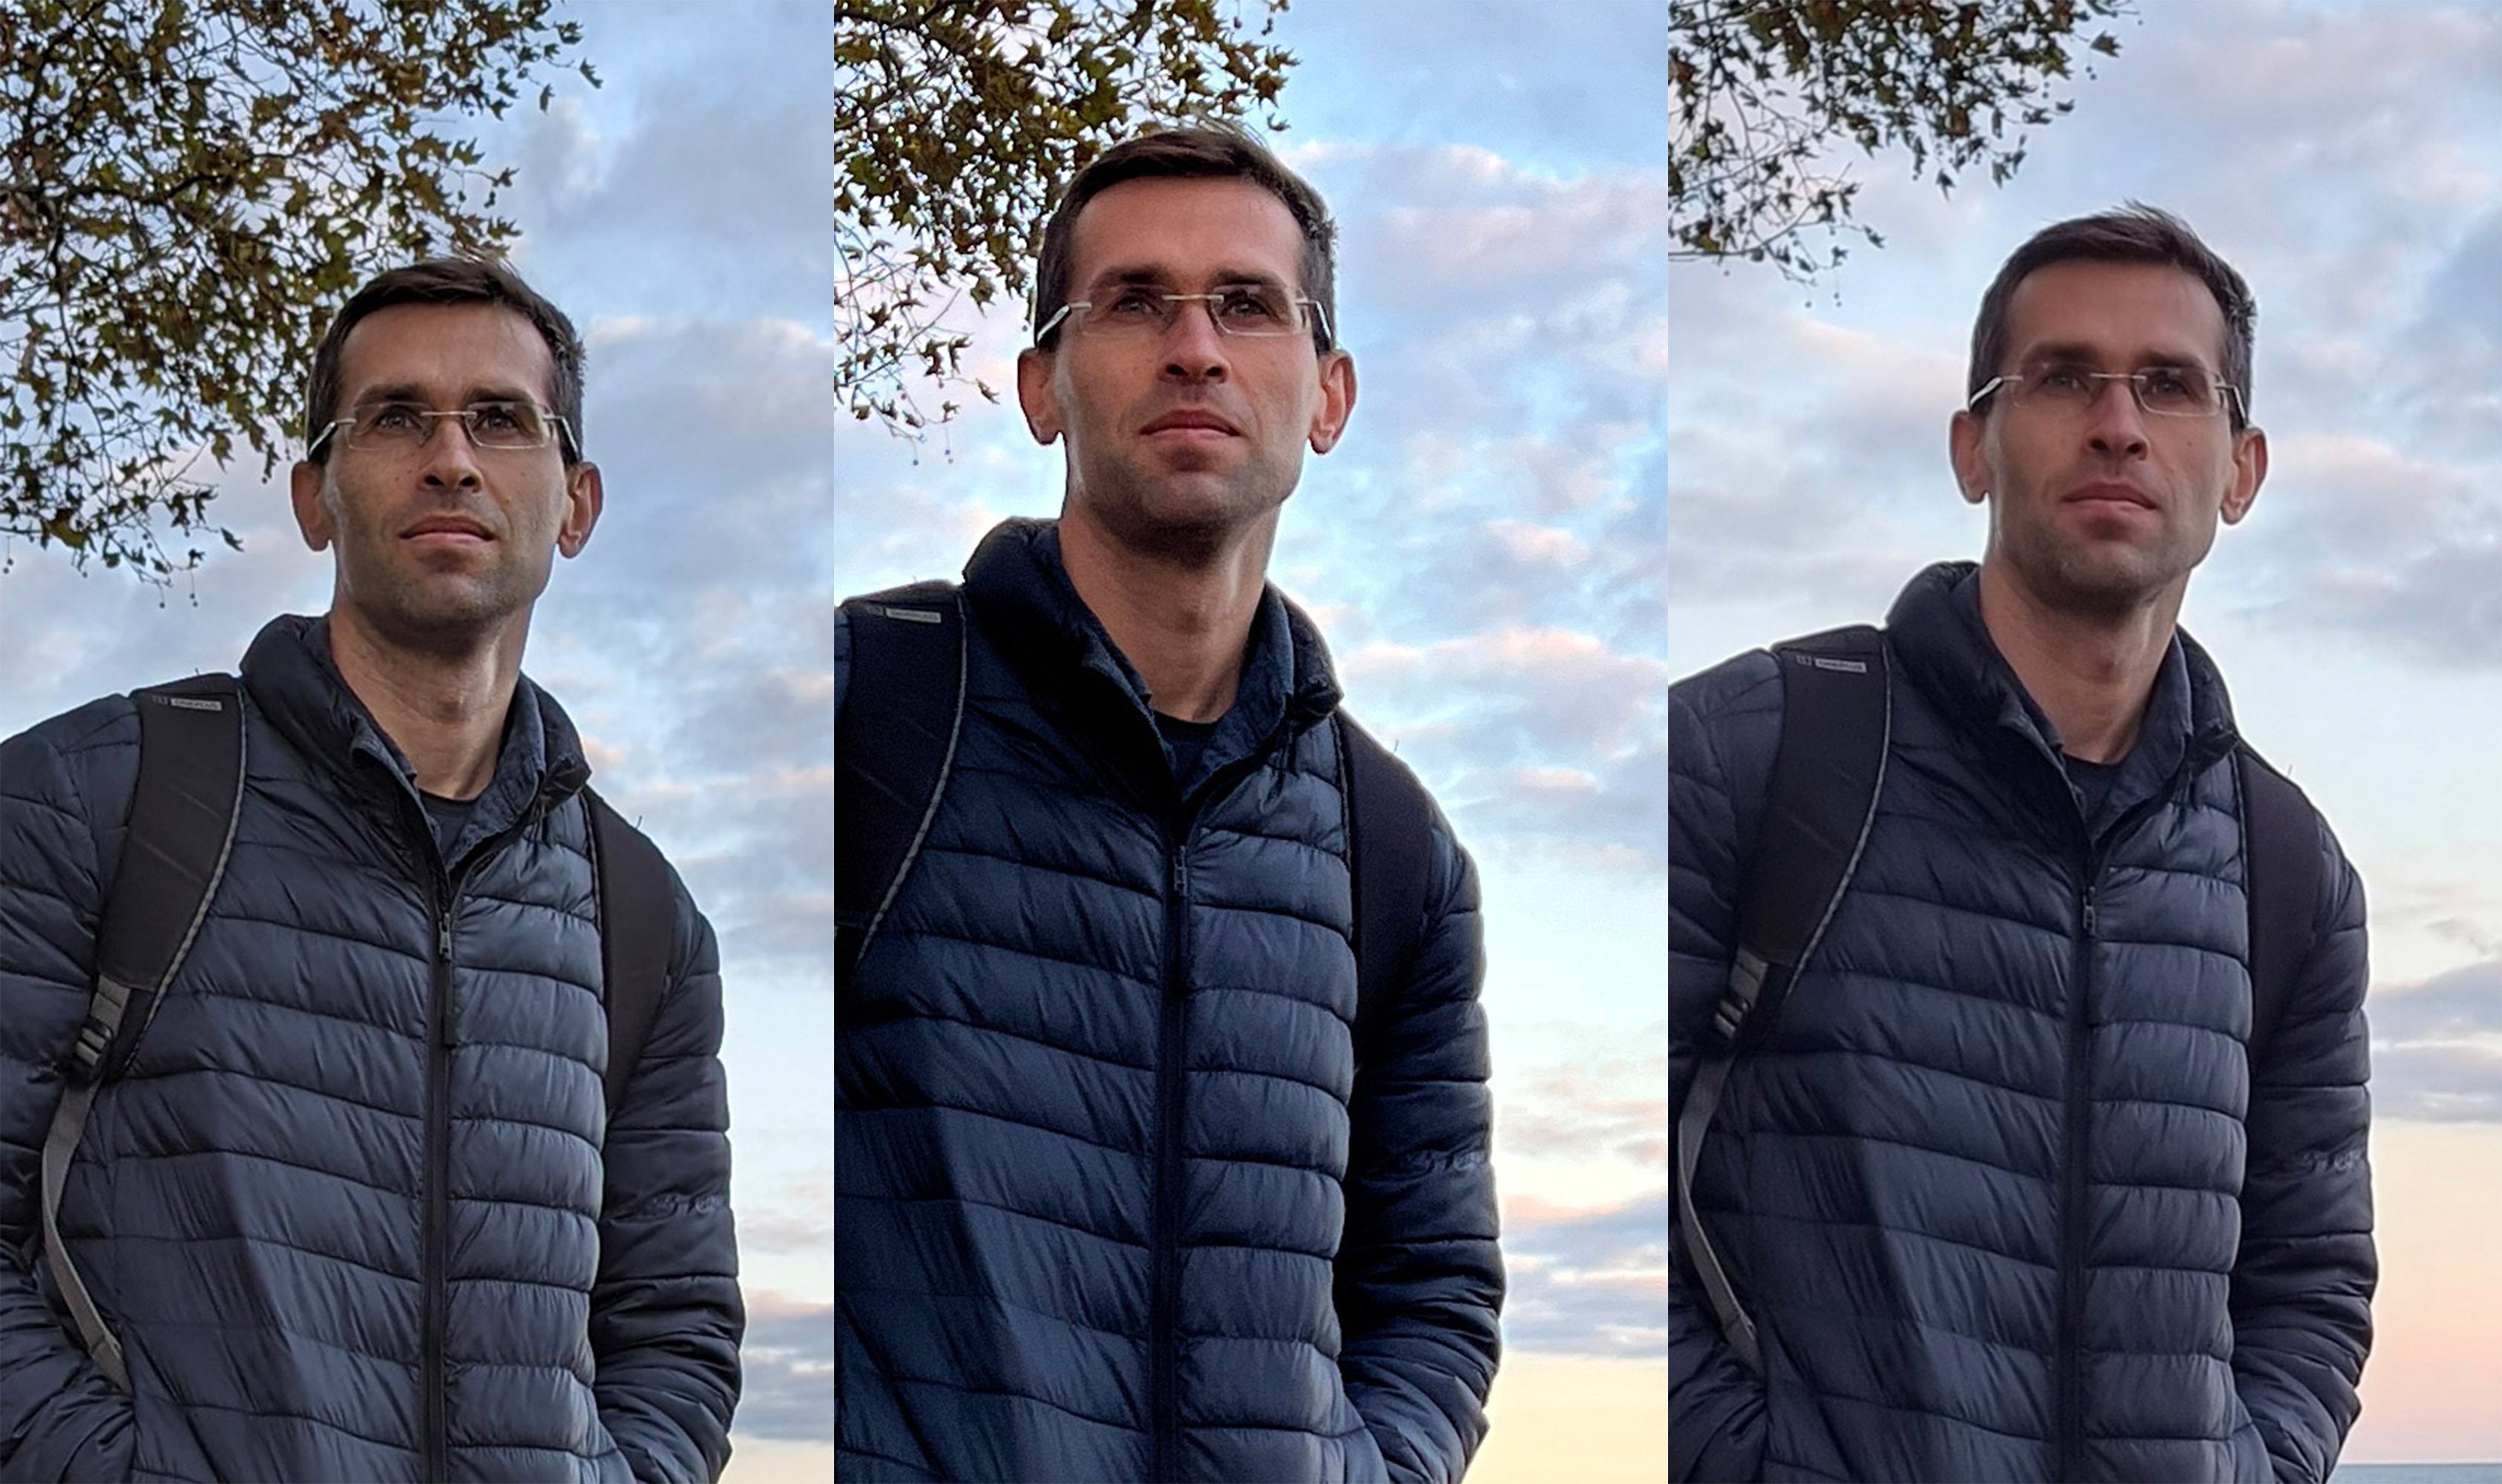 Crop from a photo, Pixel on the left, iPhone in the center, Galaxy on the right - Pixel 6 Pro vs iPhone 13 Pro Max vs Galaxy S21 Ultra: Camera Comparison